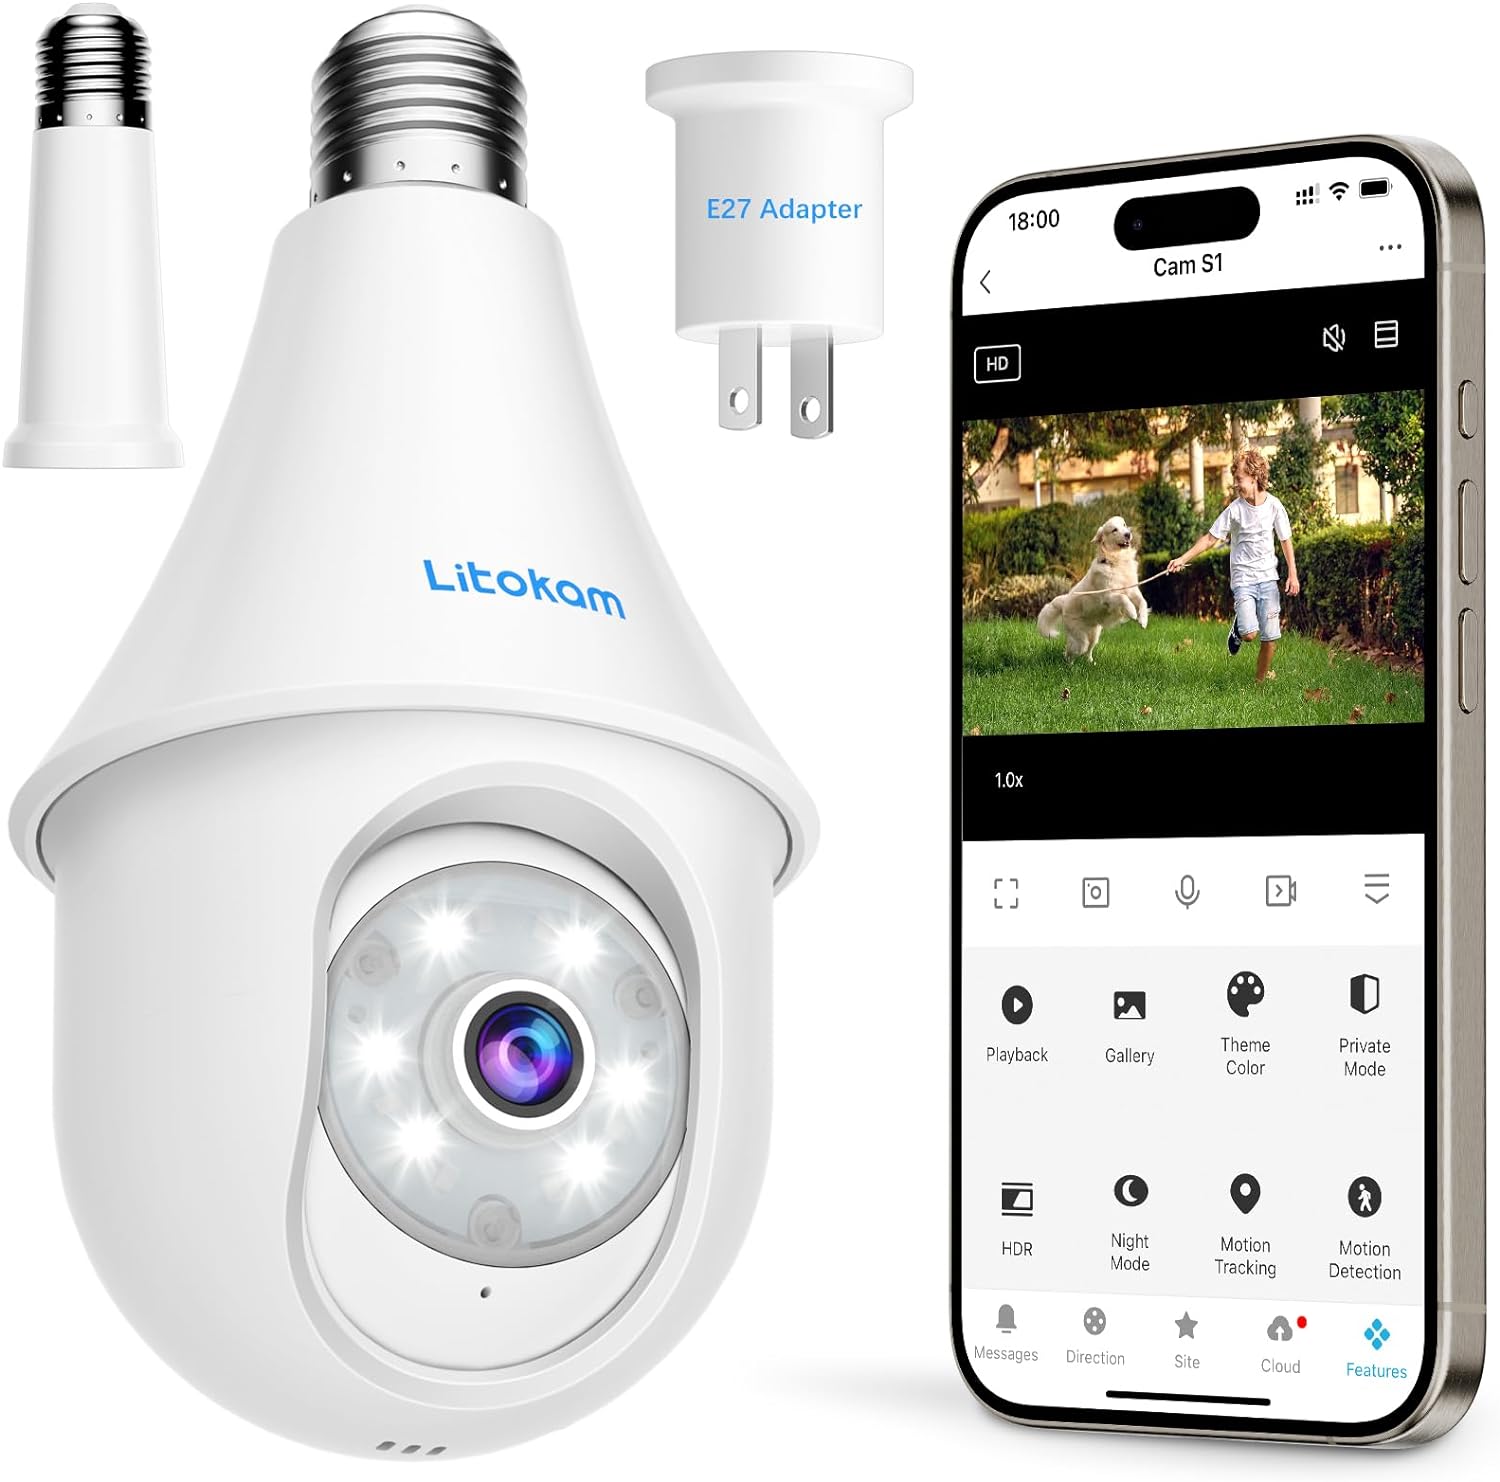 Litokam 4MP 2K 360° Indoor / Outdoor Bulb Security Camera $16.20 + Free Shipping w/ Prime or on $35+